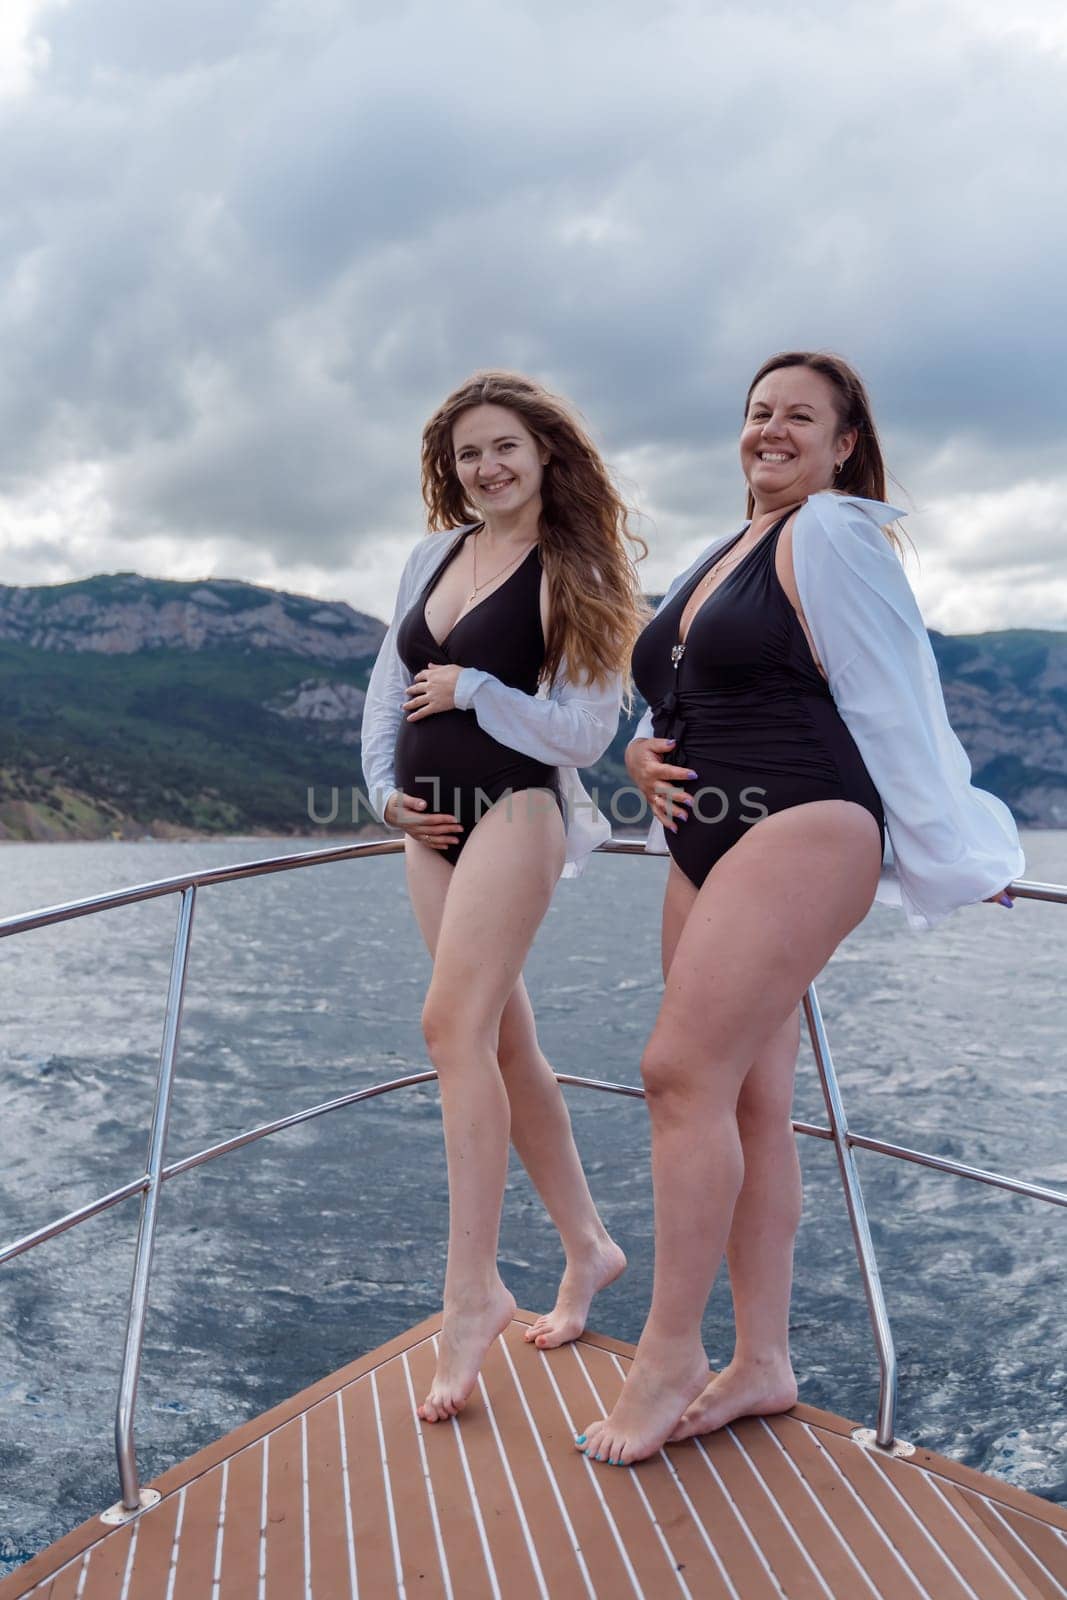 Pregnant on a yacht. Happy models in a swimsuit posing on a yacht against sky with clouds and mountains